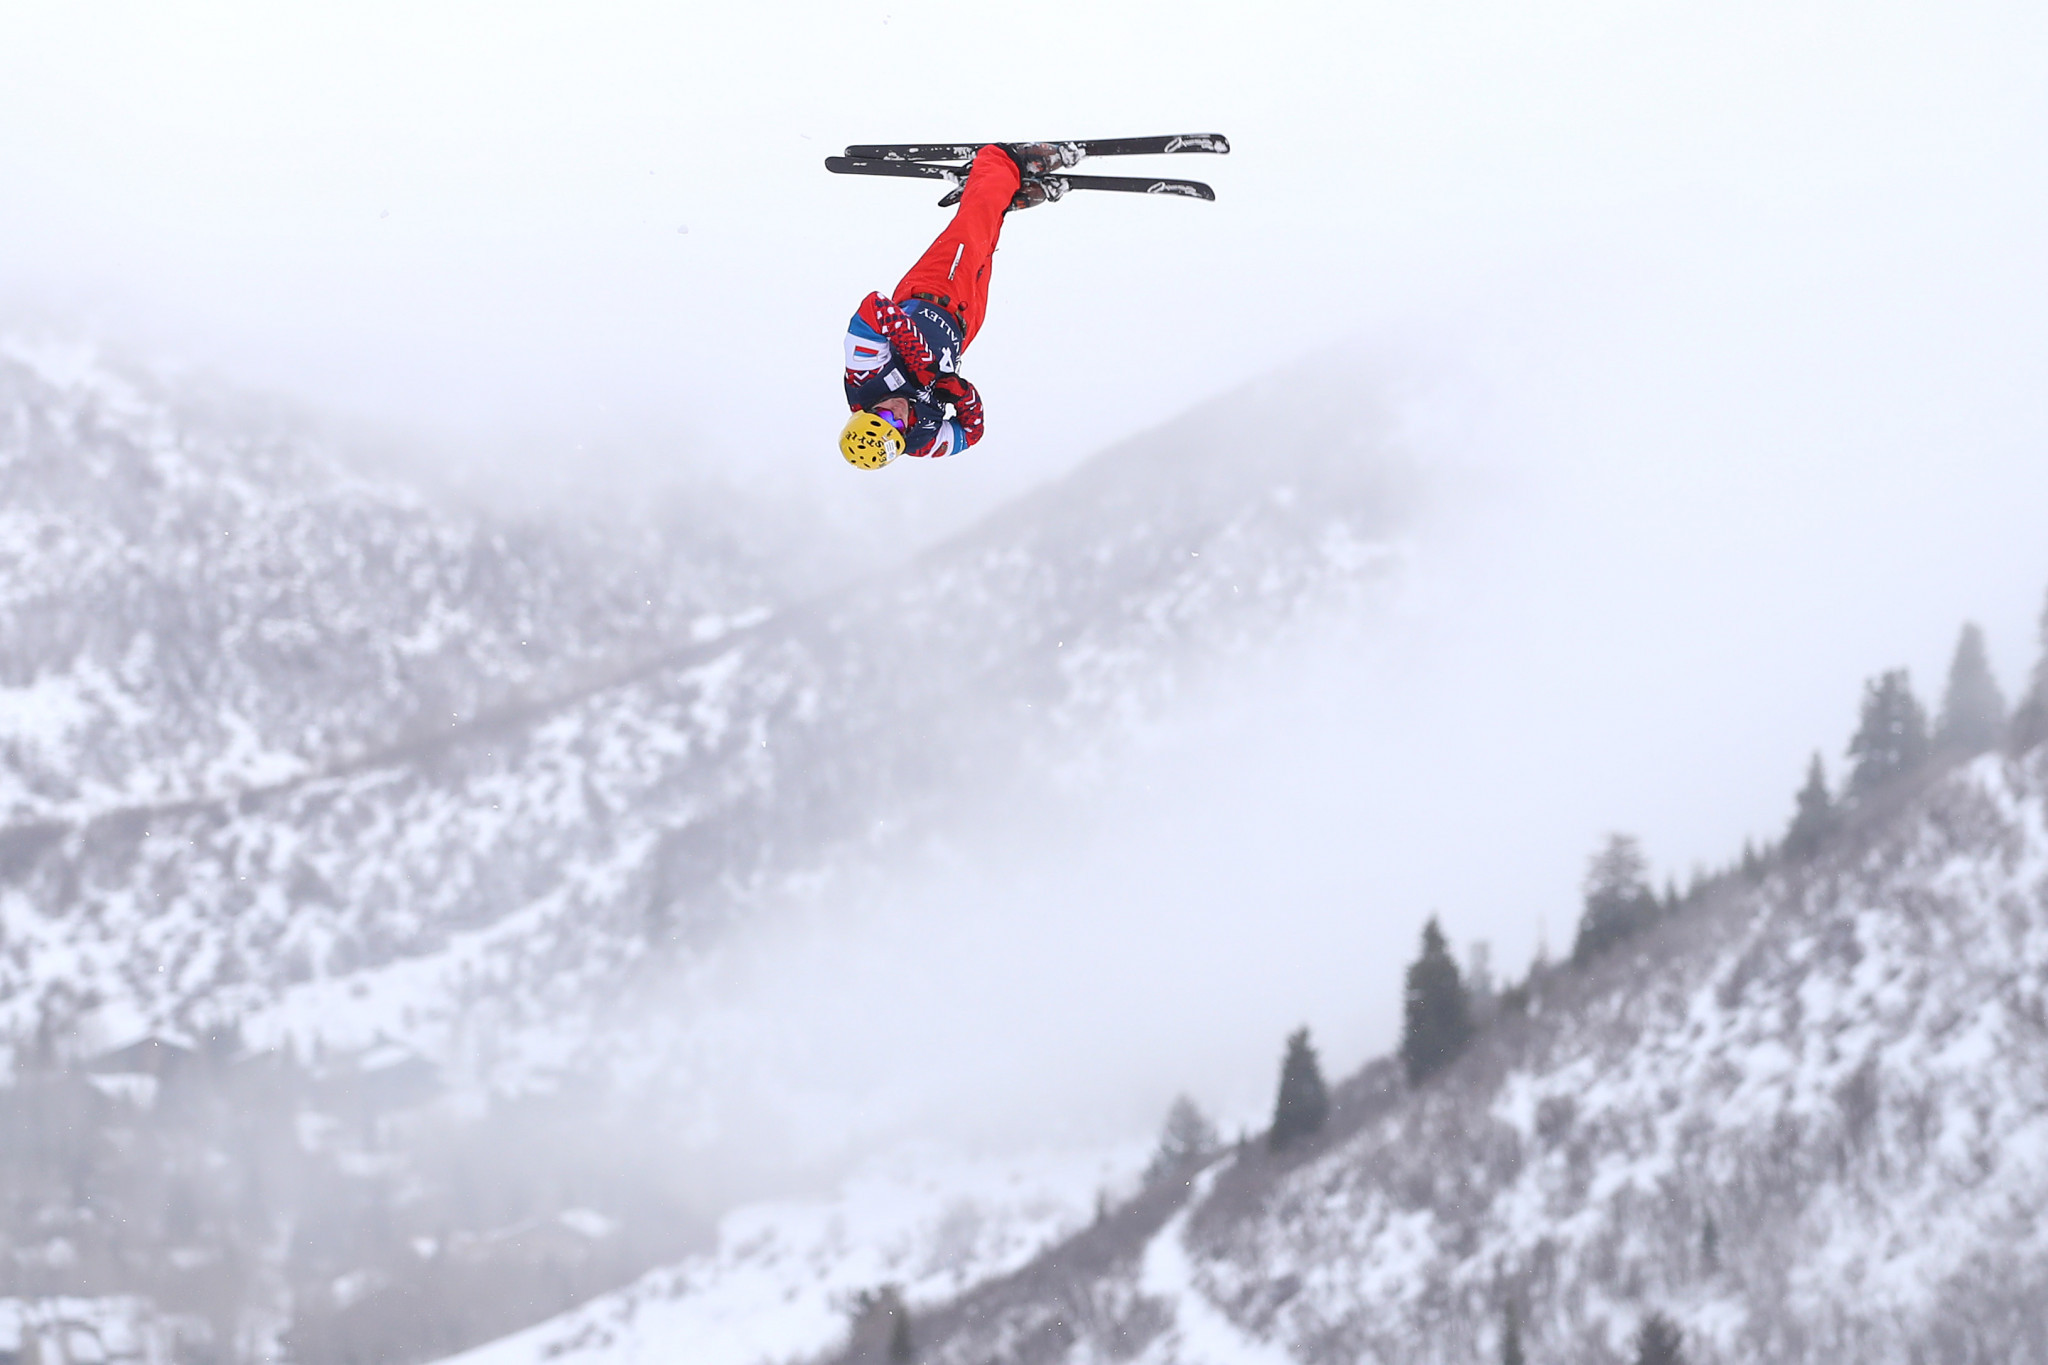 Krotov claims second career aerials victory at Freestyle Skiing World Cup